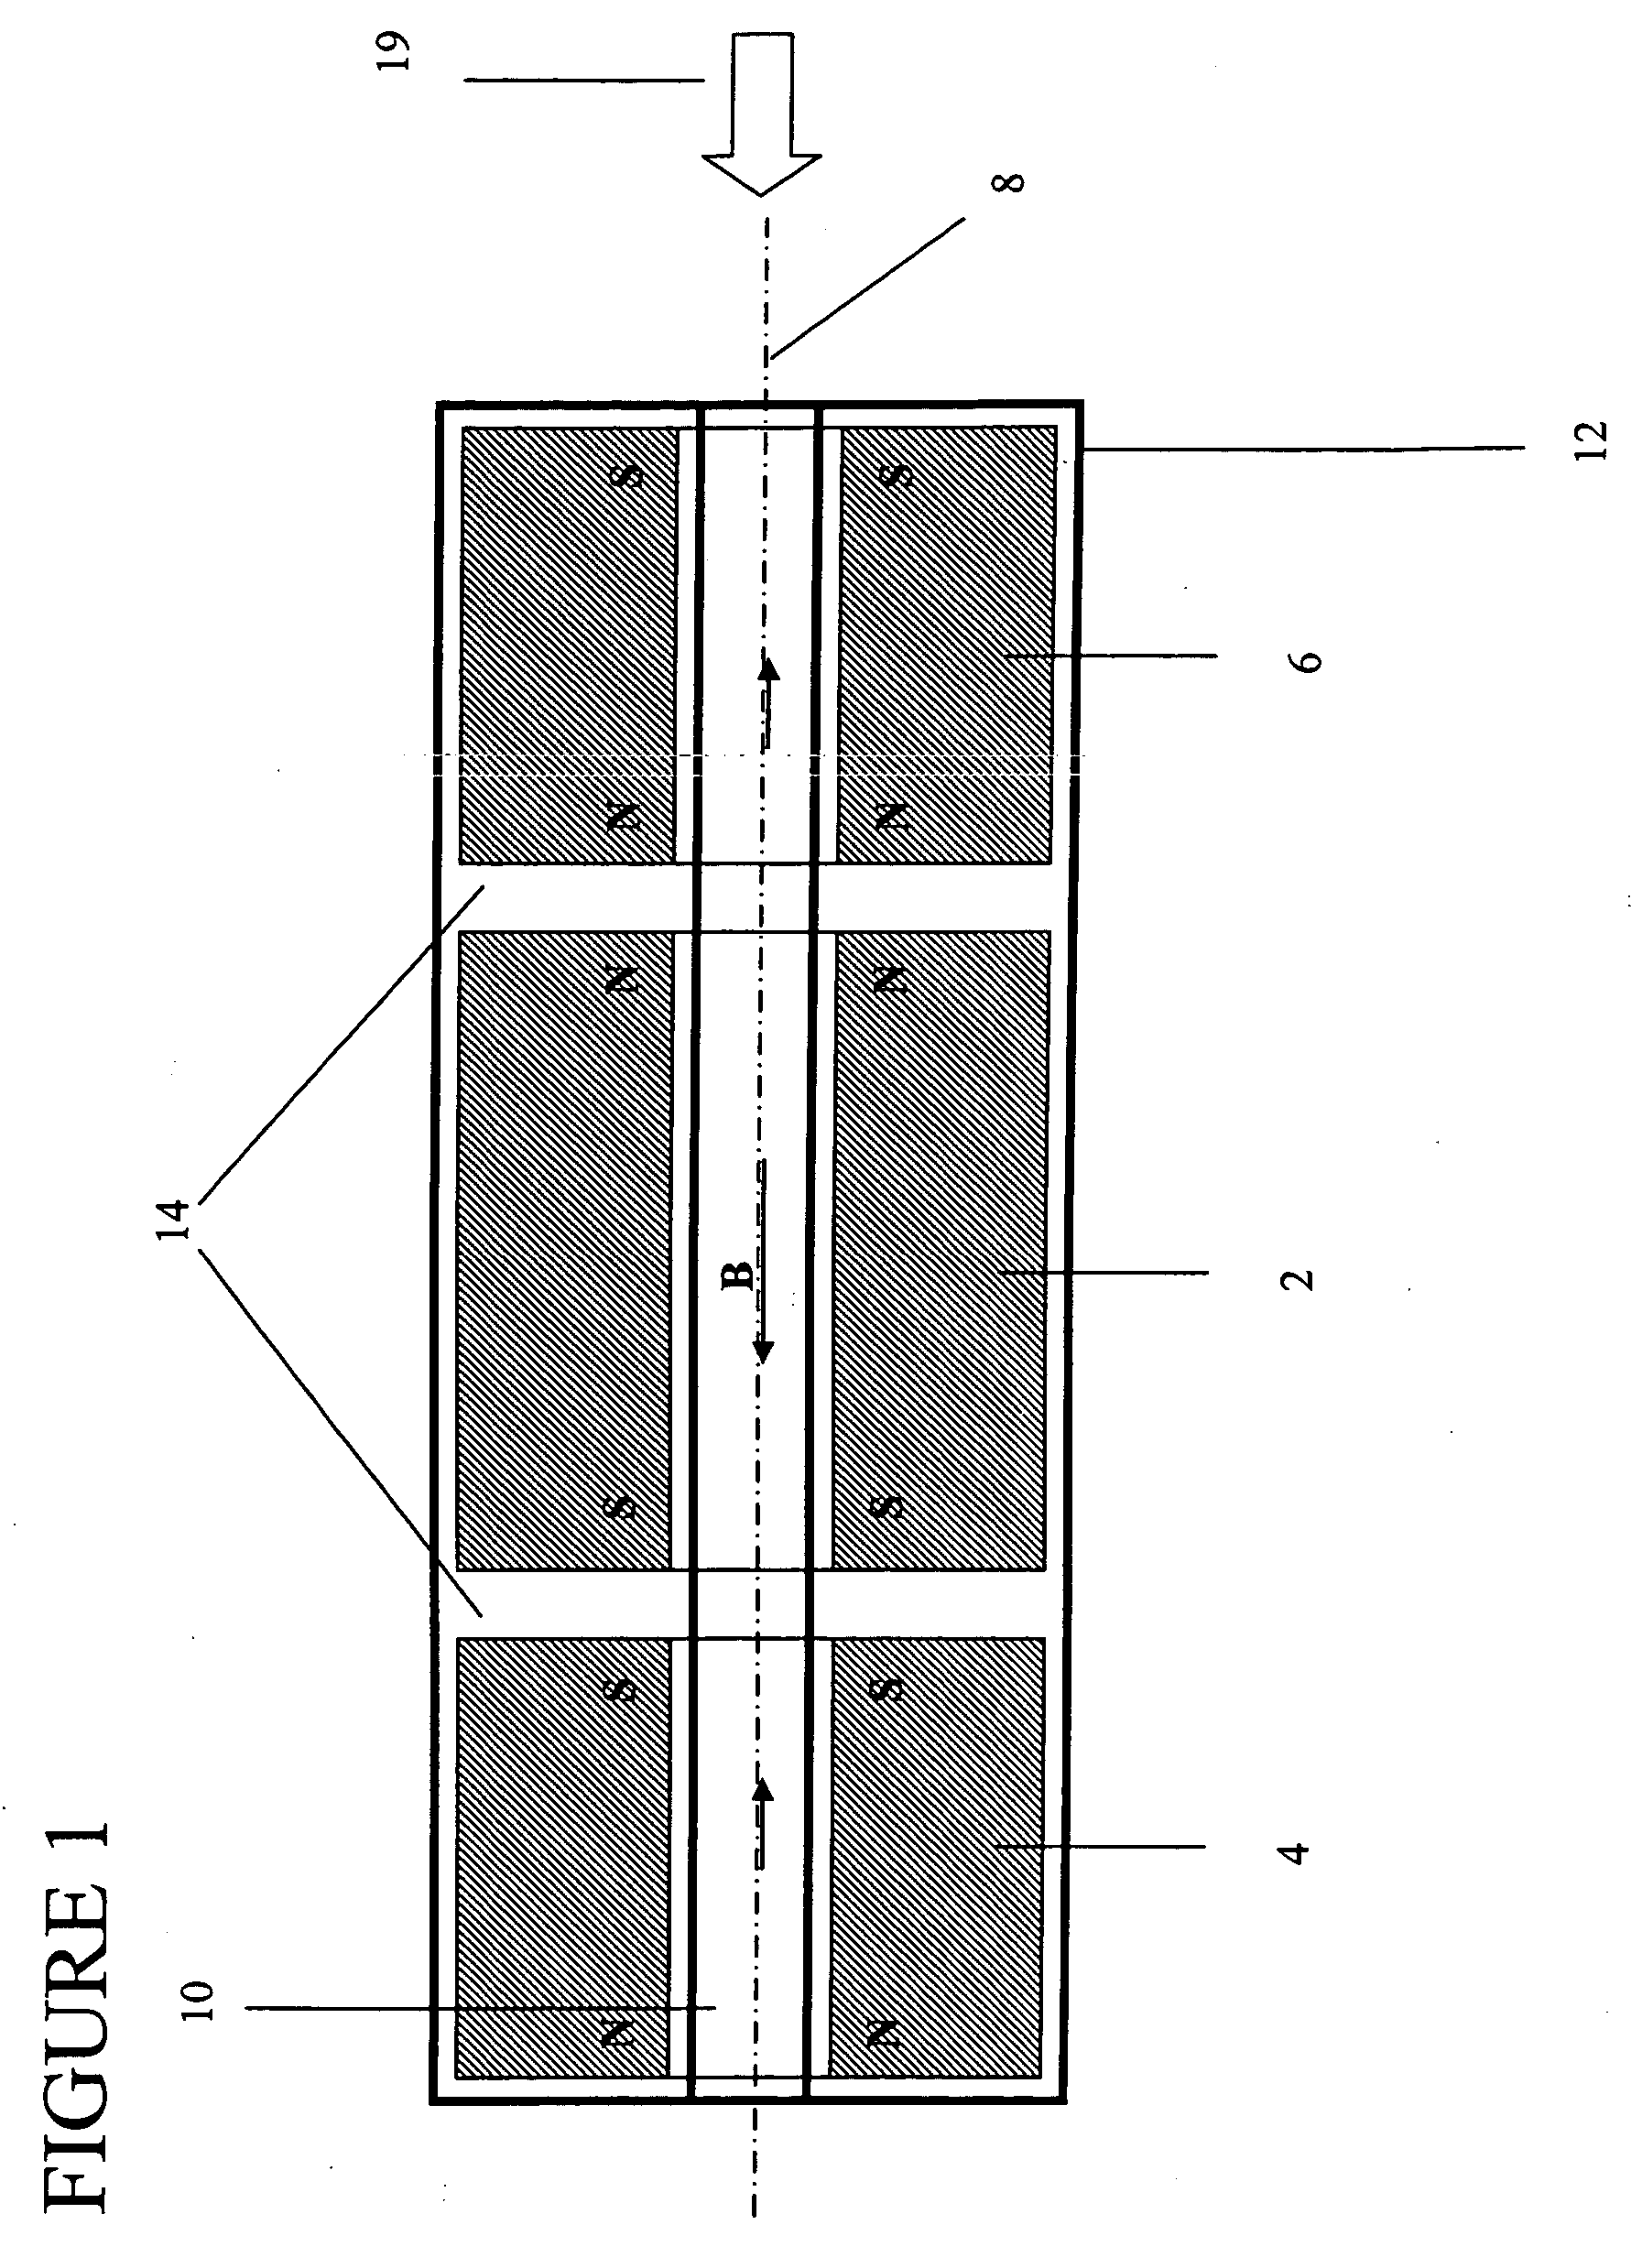 Permanent magnet structure with axial access for spectroscopy applications